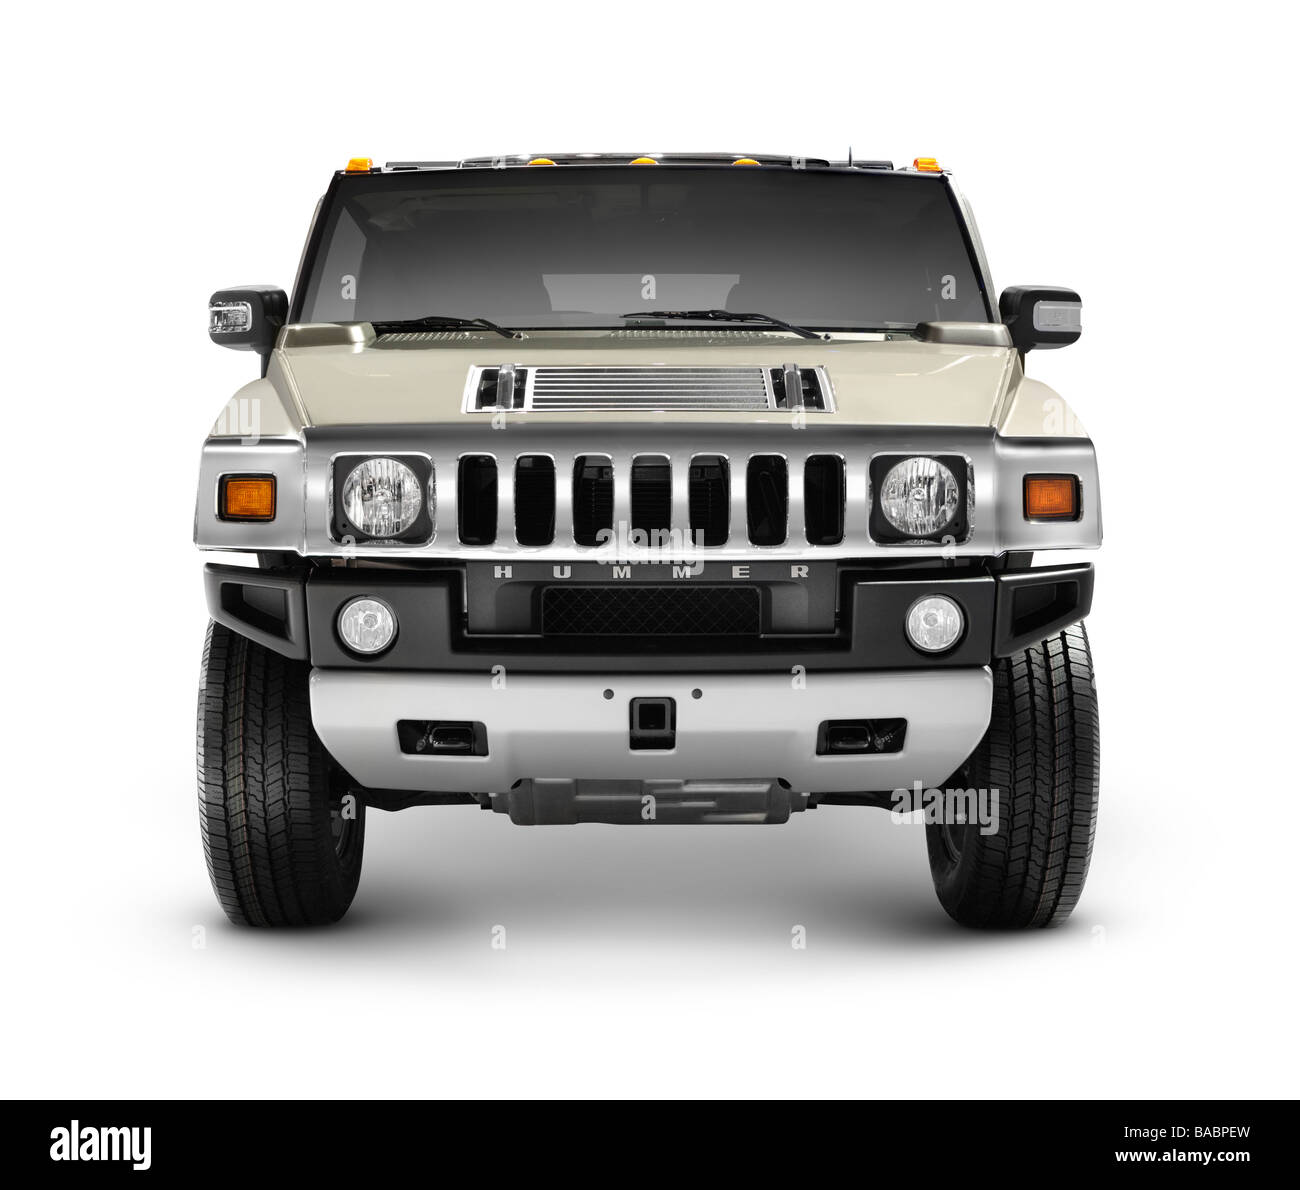 Licenza e stampe a MaximImages.com - Hummer H2 camion nero Foto Stock